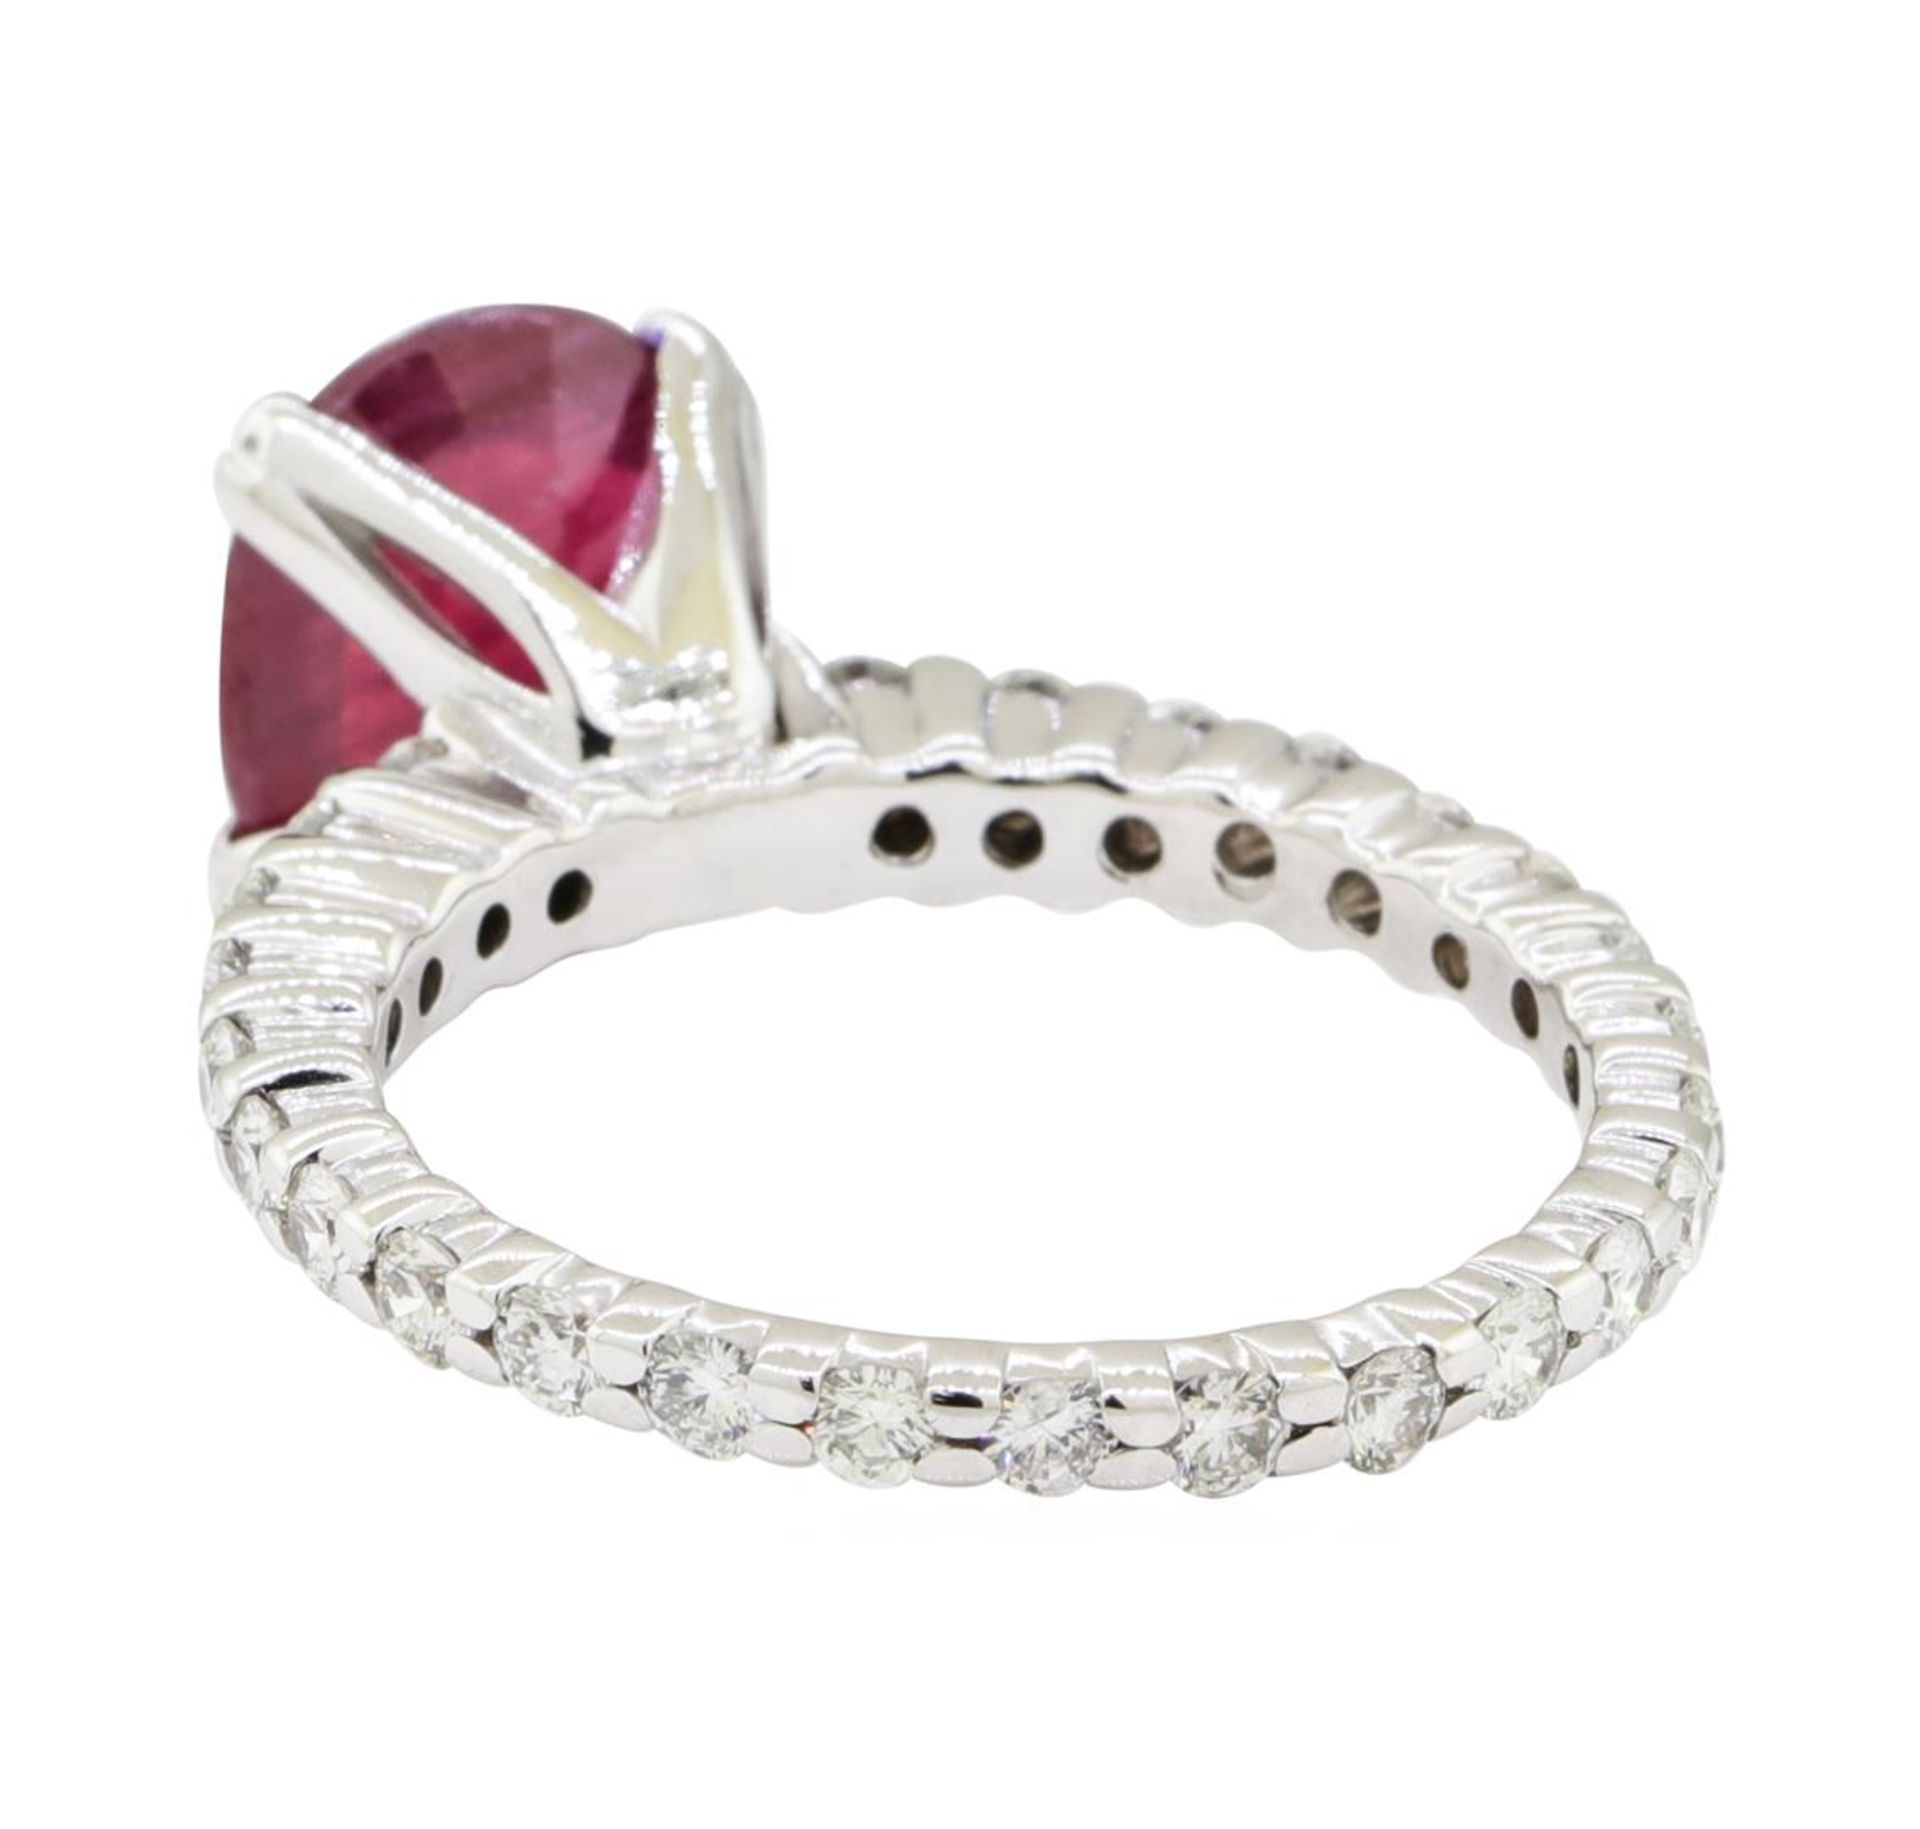 4.80 ctw Ruby and Diamond Ring - 14KT White Gold - Image 3 of 5